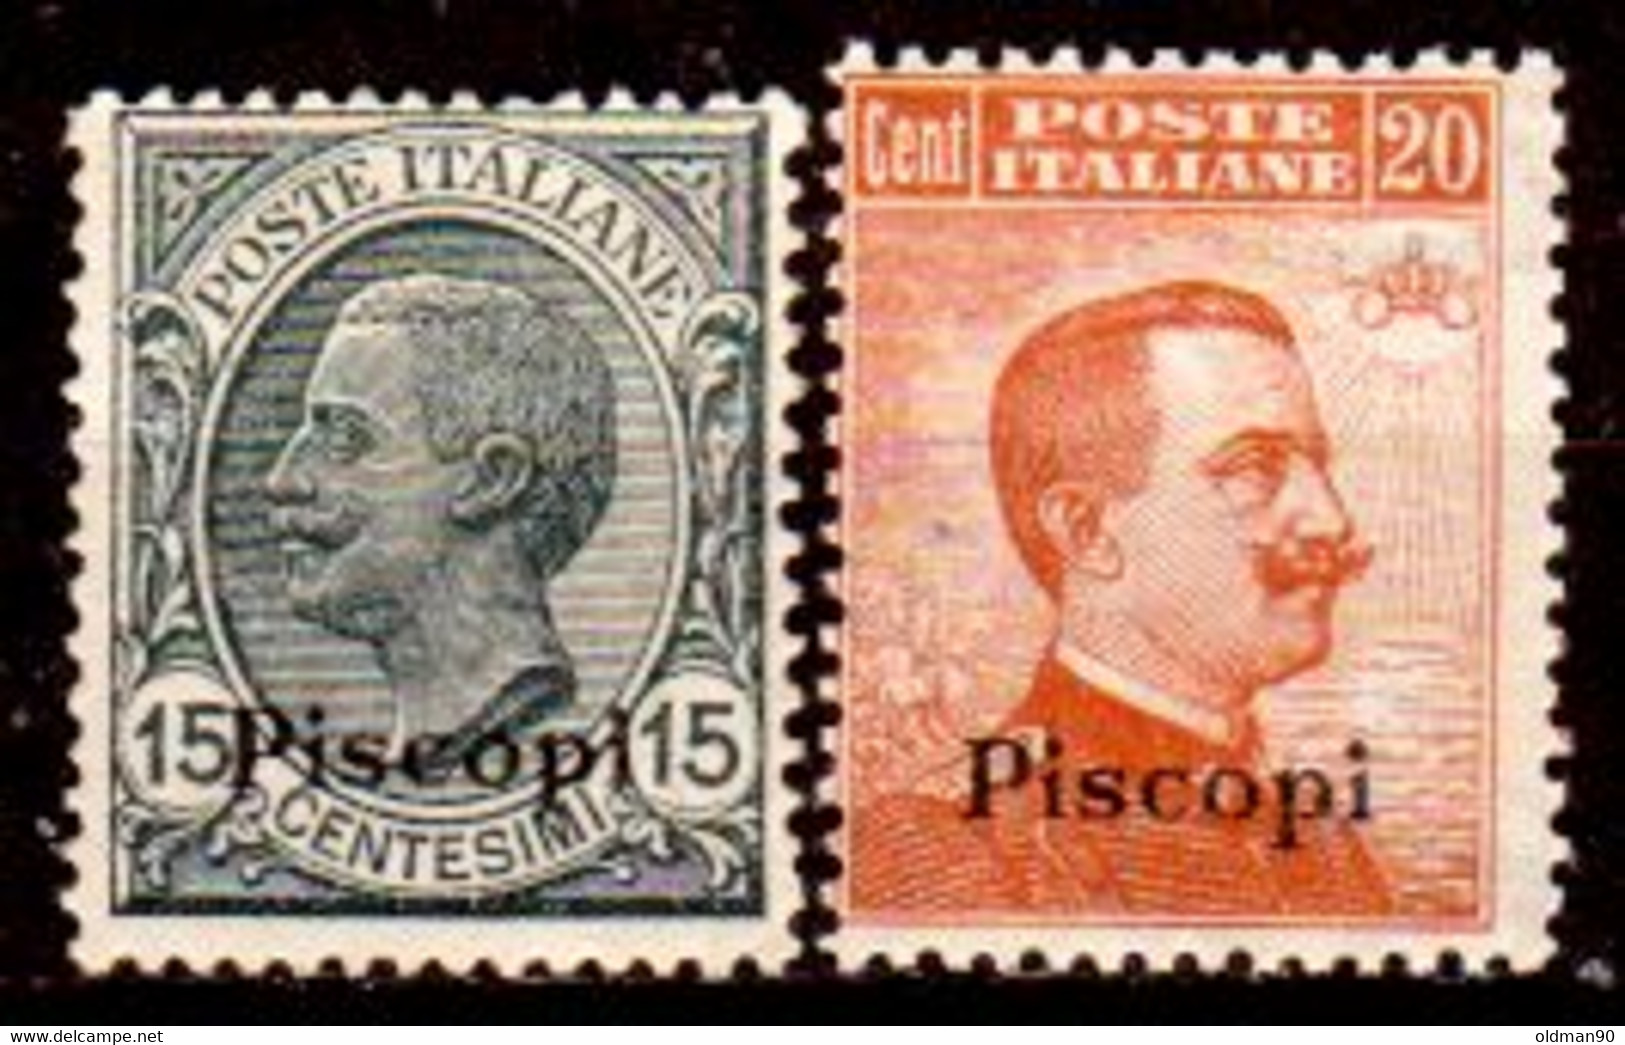 Egeo-OS-321- Piscopi: Original Stamps And Overprint 1921-22 (++) MNH - Quality In Your Opinion. - Ägäis (Piscopi)